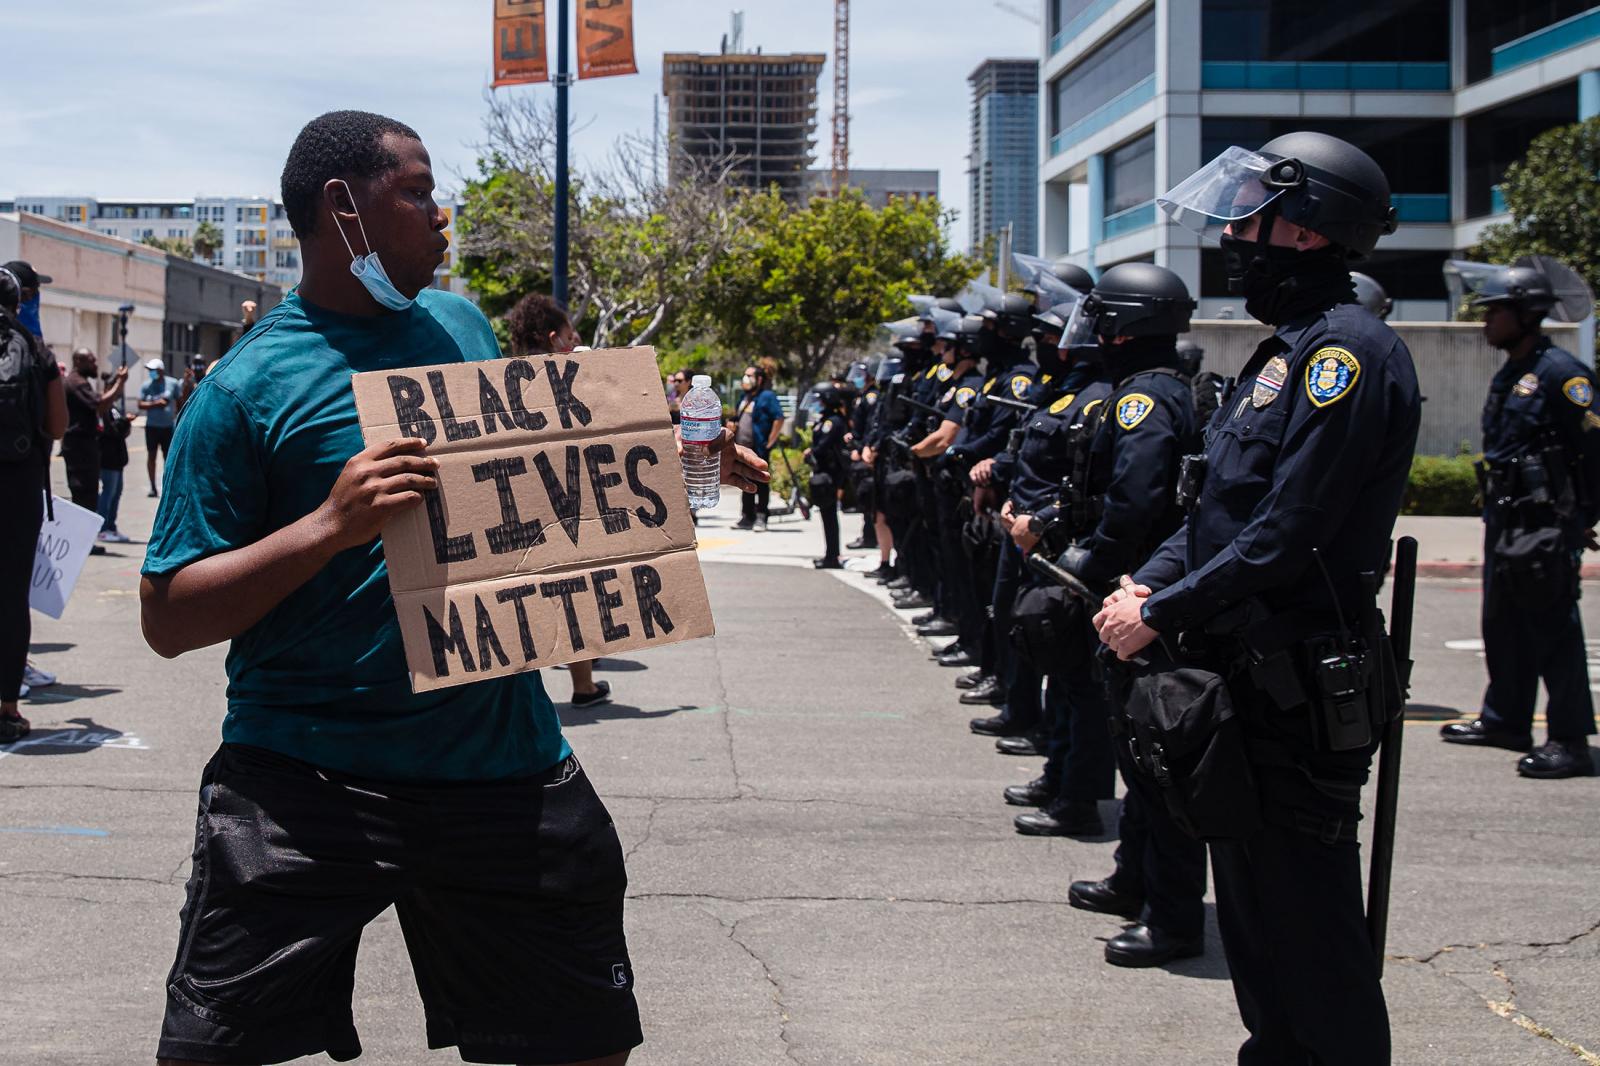 A man holds a &quot;Black Lives Matter&quot; sign in front of the police in downtown San Diego on May 31, 2020 during a demonstration against the death of George Floyd, an unarmed black man who died while being arrested and pinned to the ground by the knee of a Minneapolis police officer.